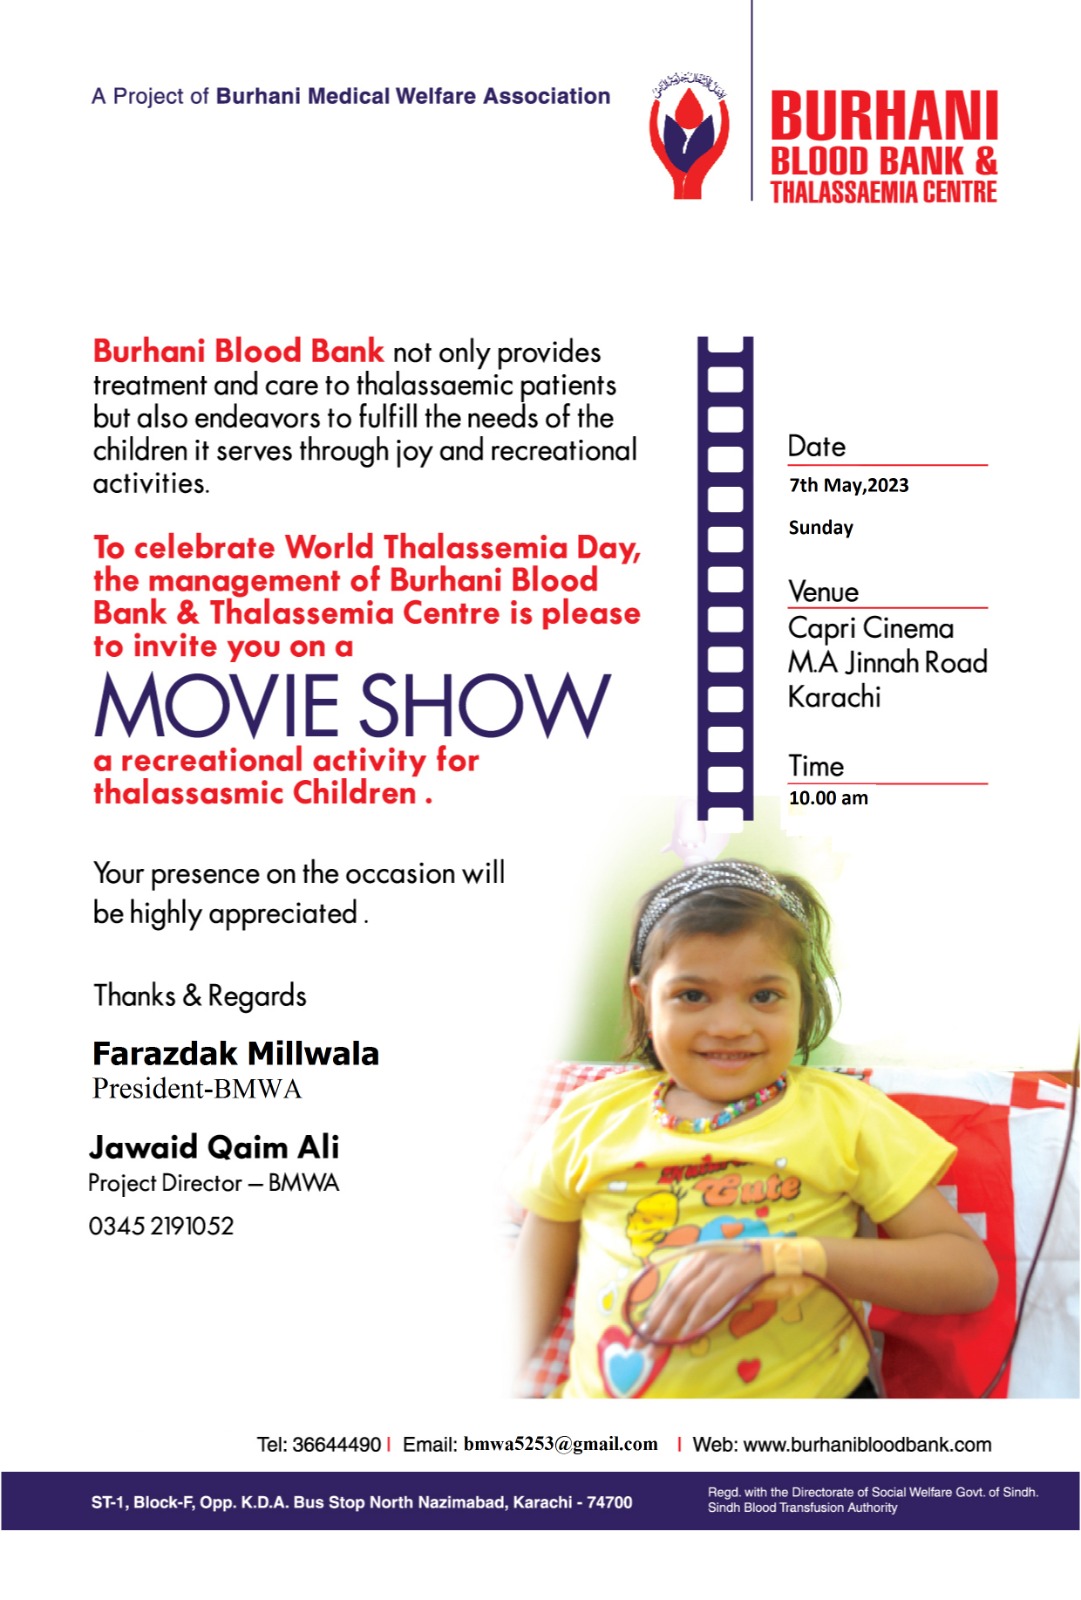 Movie Show by Burhani Thalassemia Center on 7th May 2023